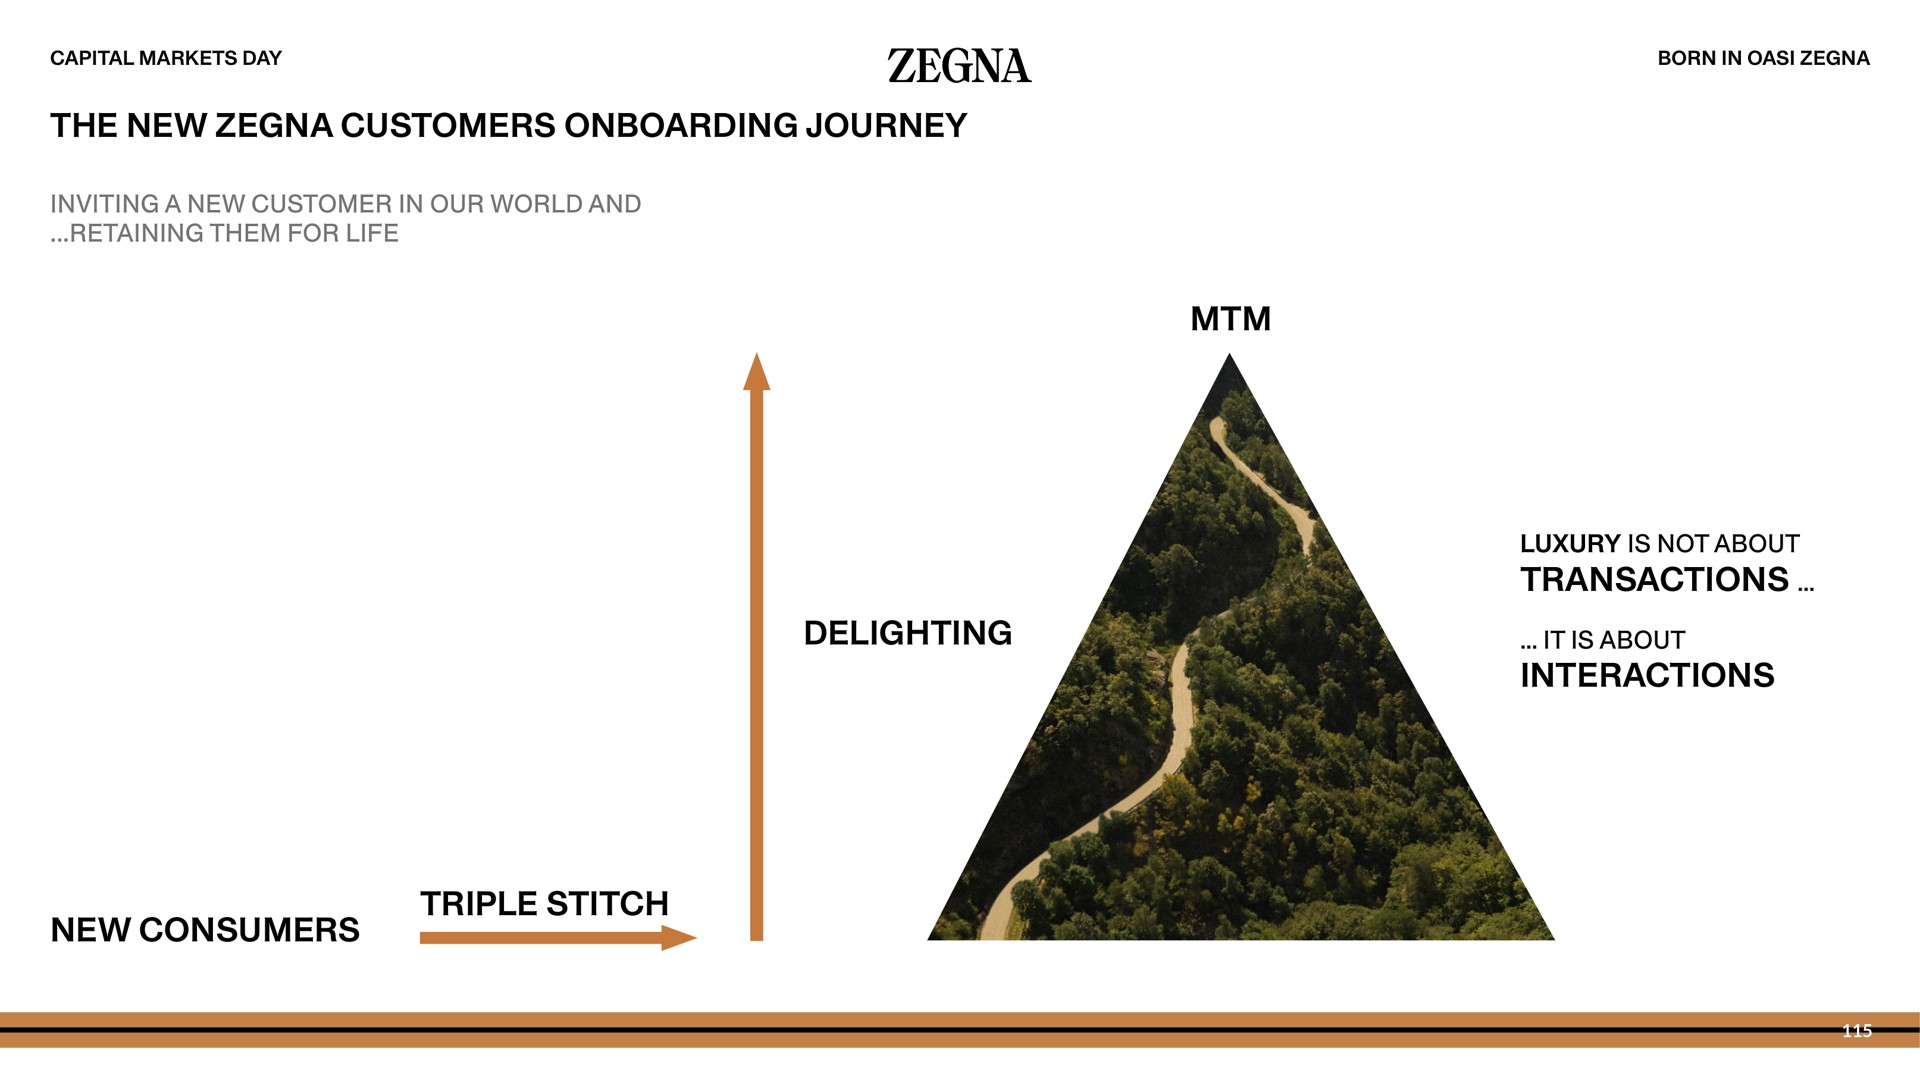 the new customers journey delighting transactions interactions new consumers triple stitch capital markets day born in luxury is not about tis about | Zegna